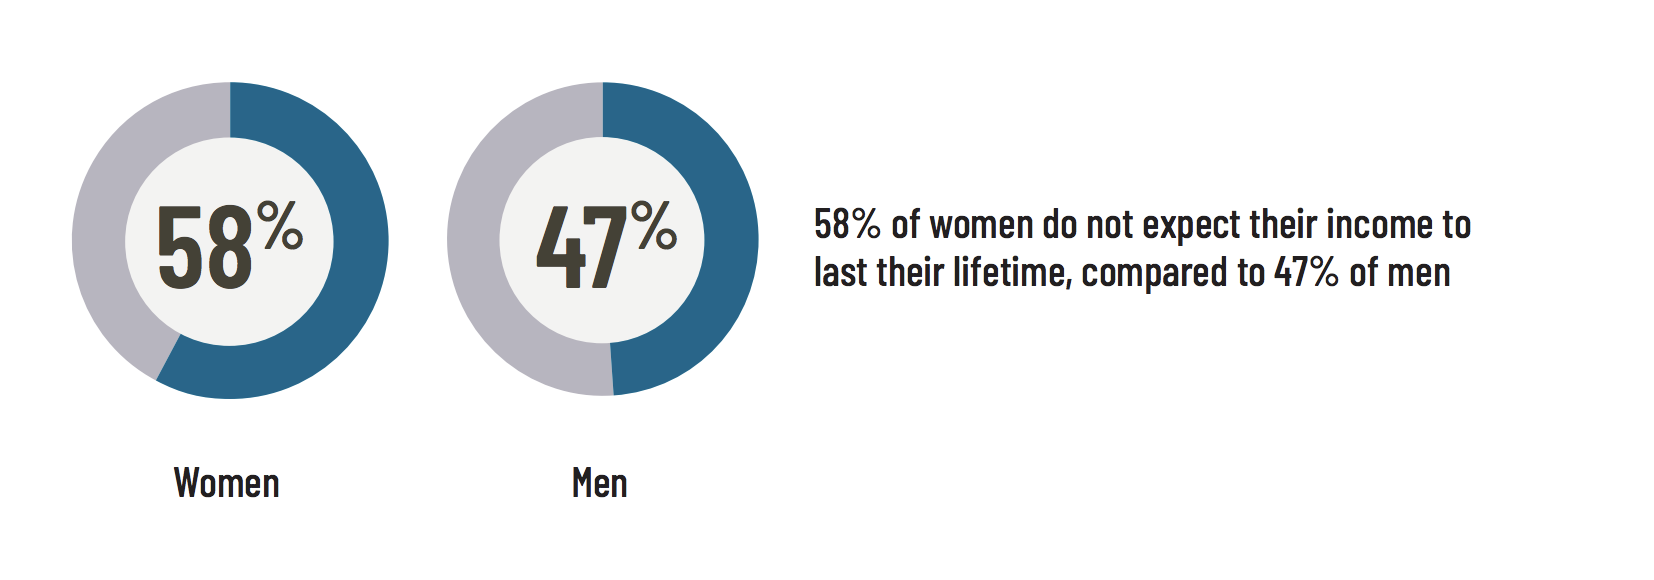 Women’s Retirement Income Concerns, Alliance for Lifetime Income Study